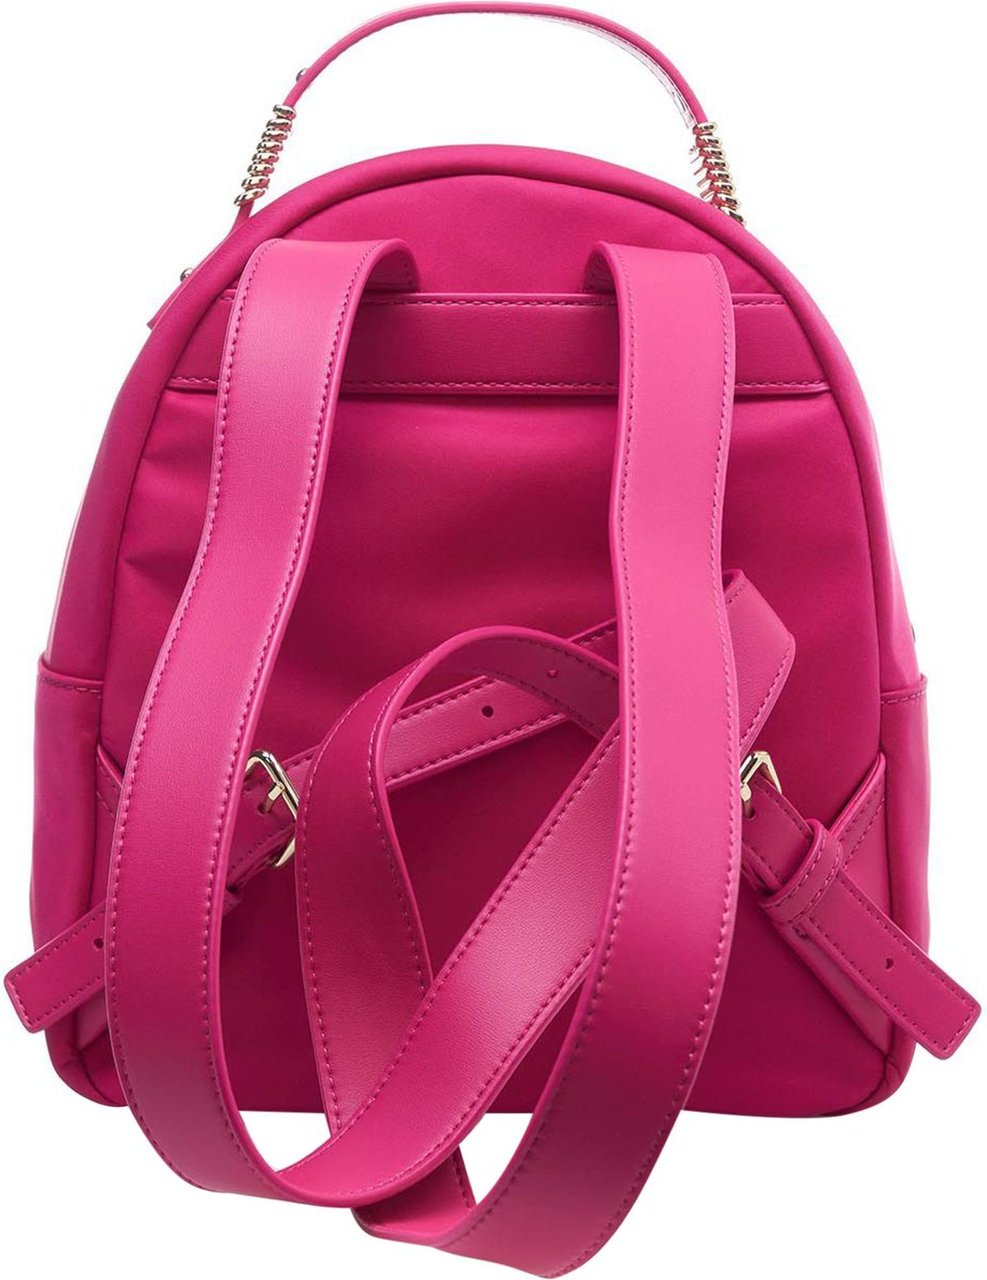 Love Moschino Backpack In Nylon Pink Roze